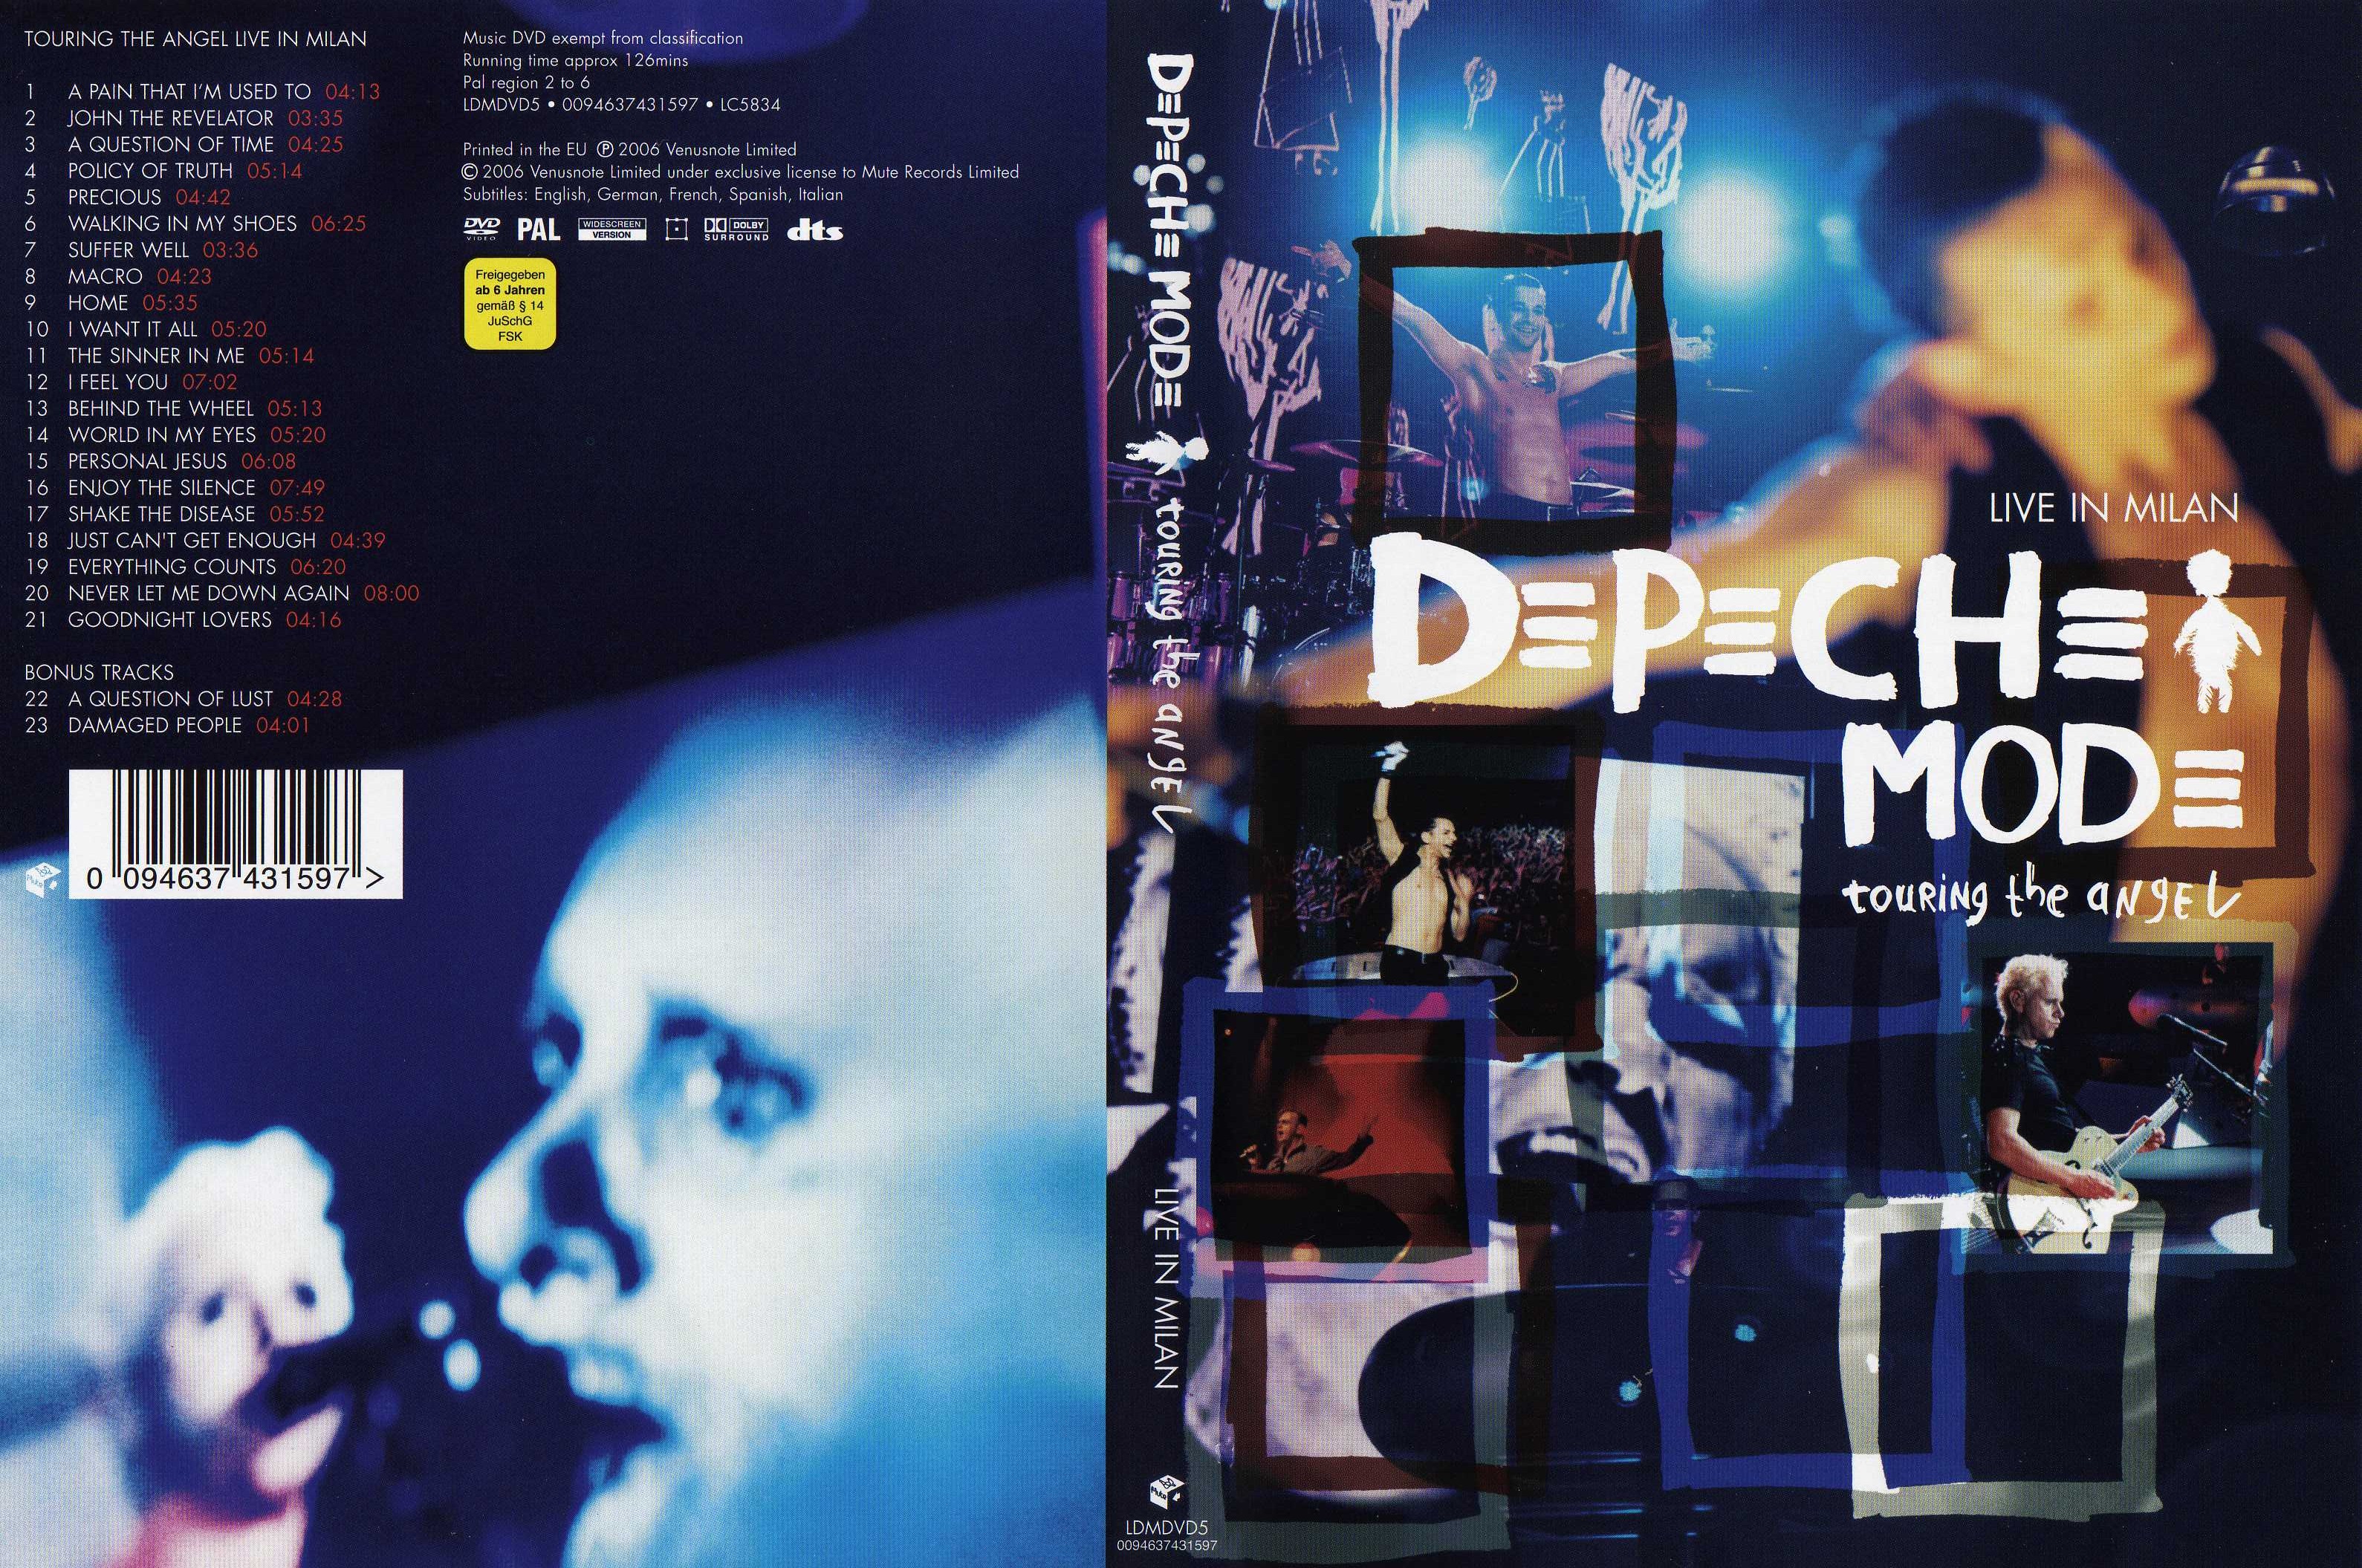 Jaquette DVD Depeche Mode Touring the Angel  live in milan 2006